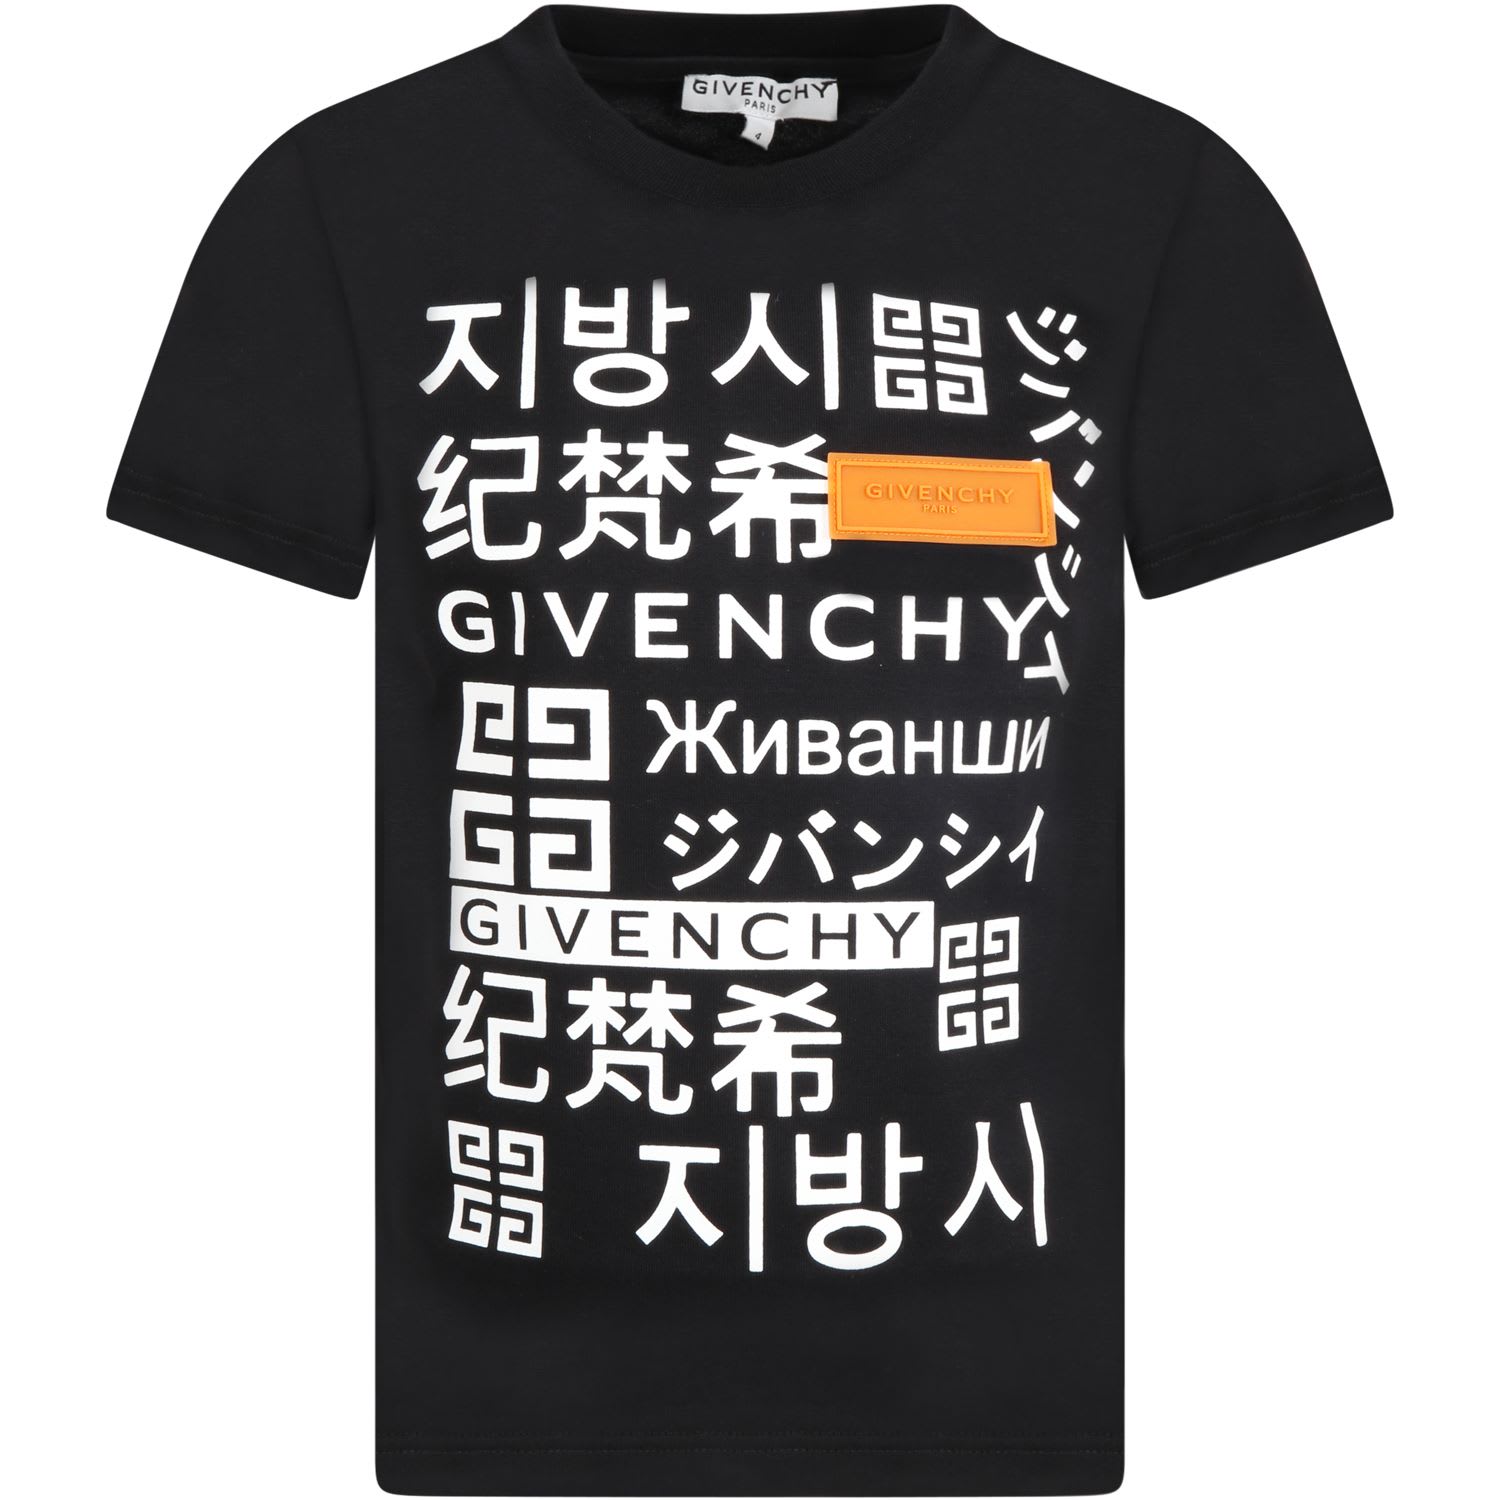 Givenchy Black T-shirt For Kids With Logos